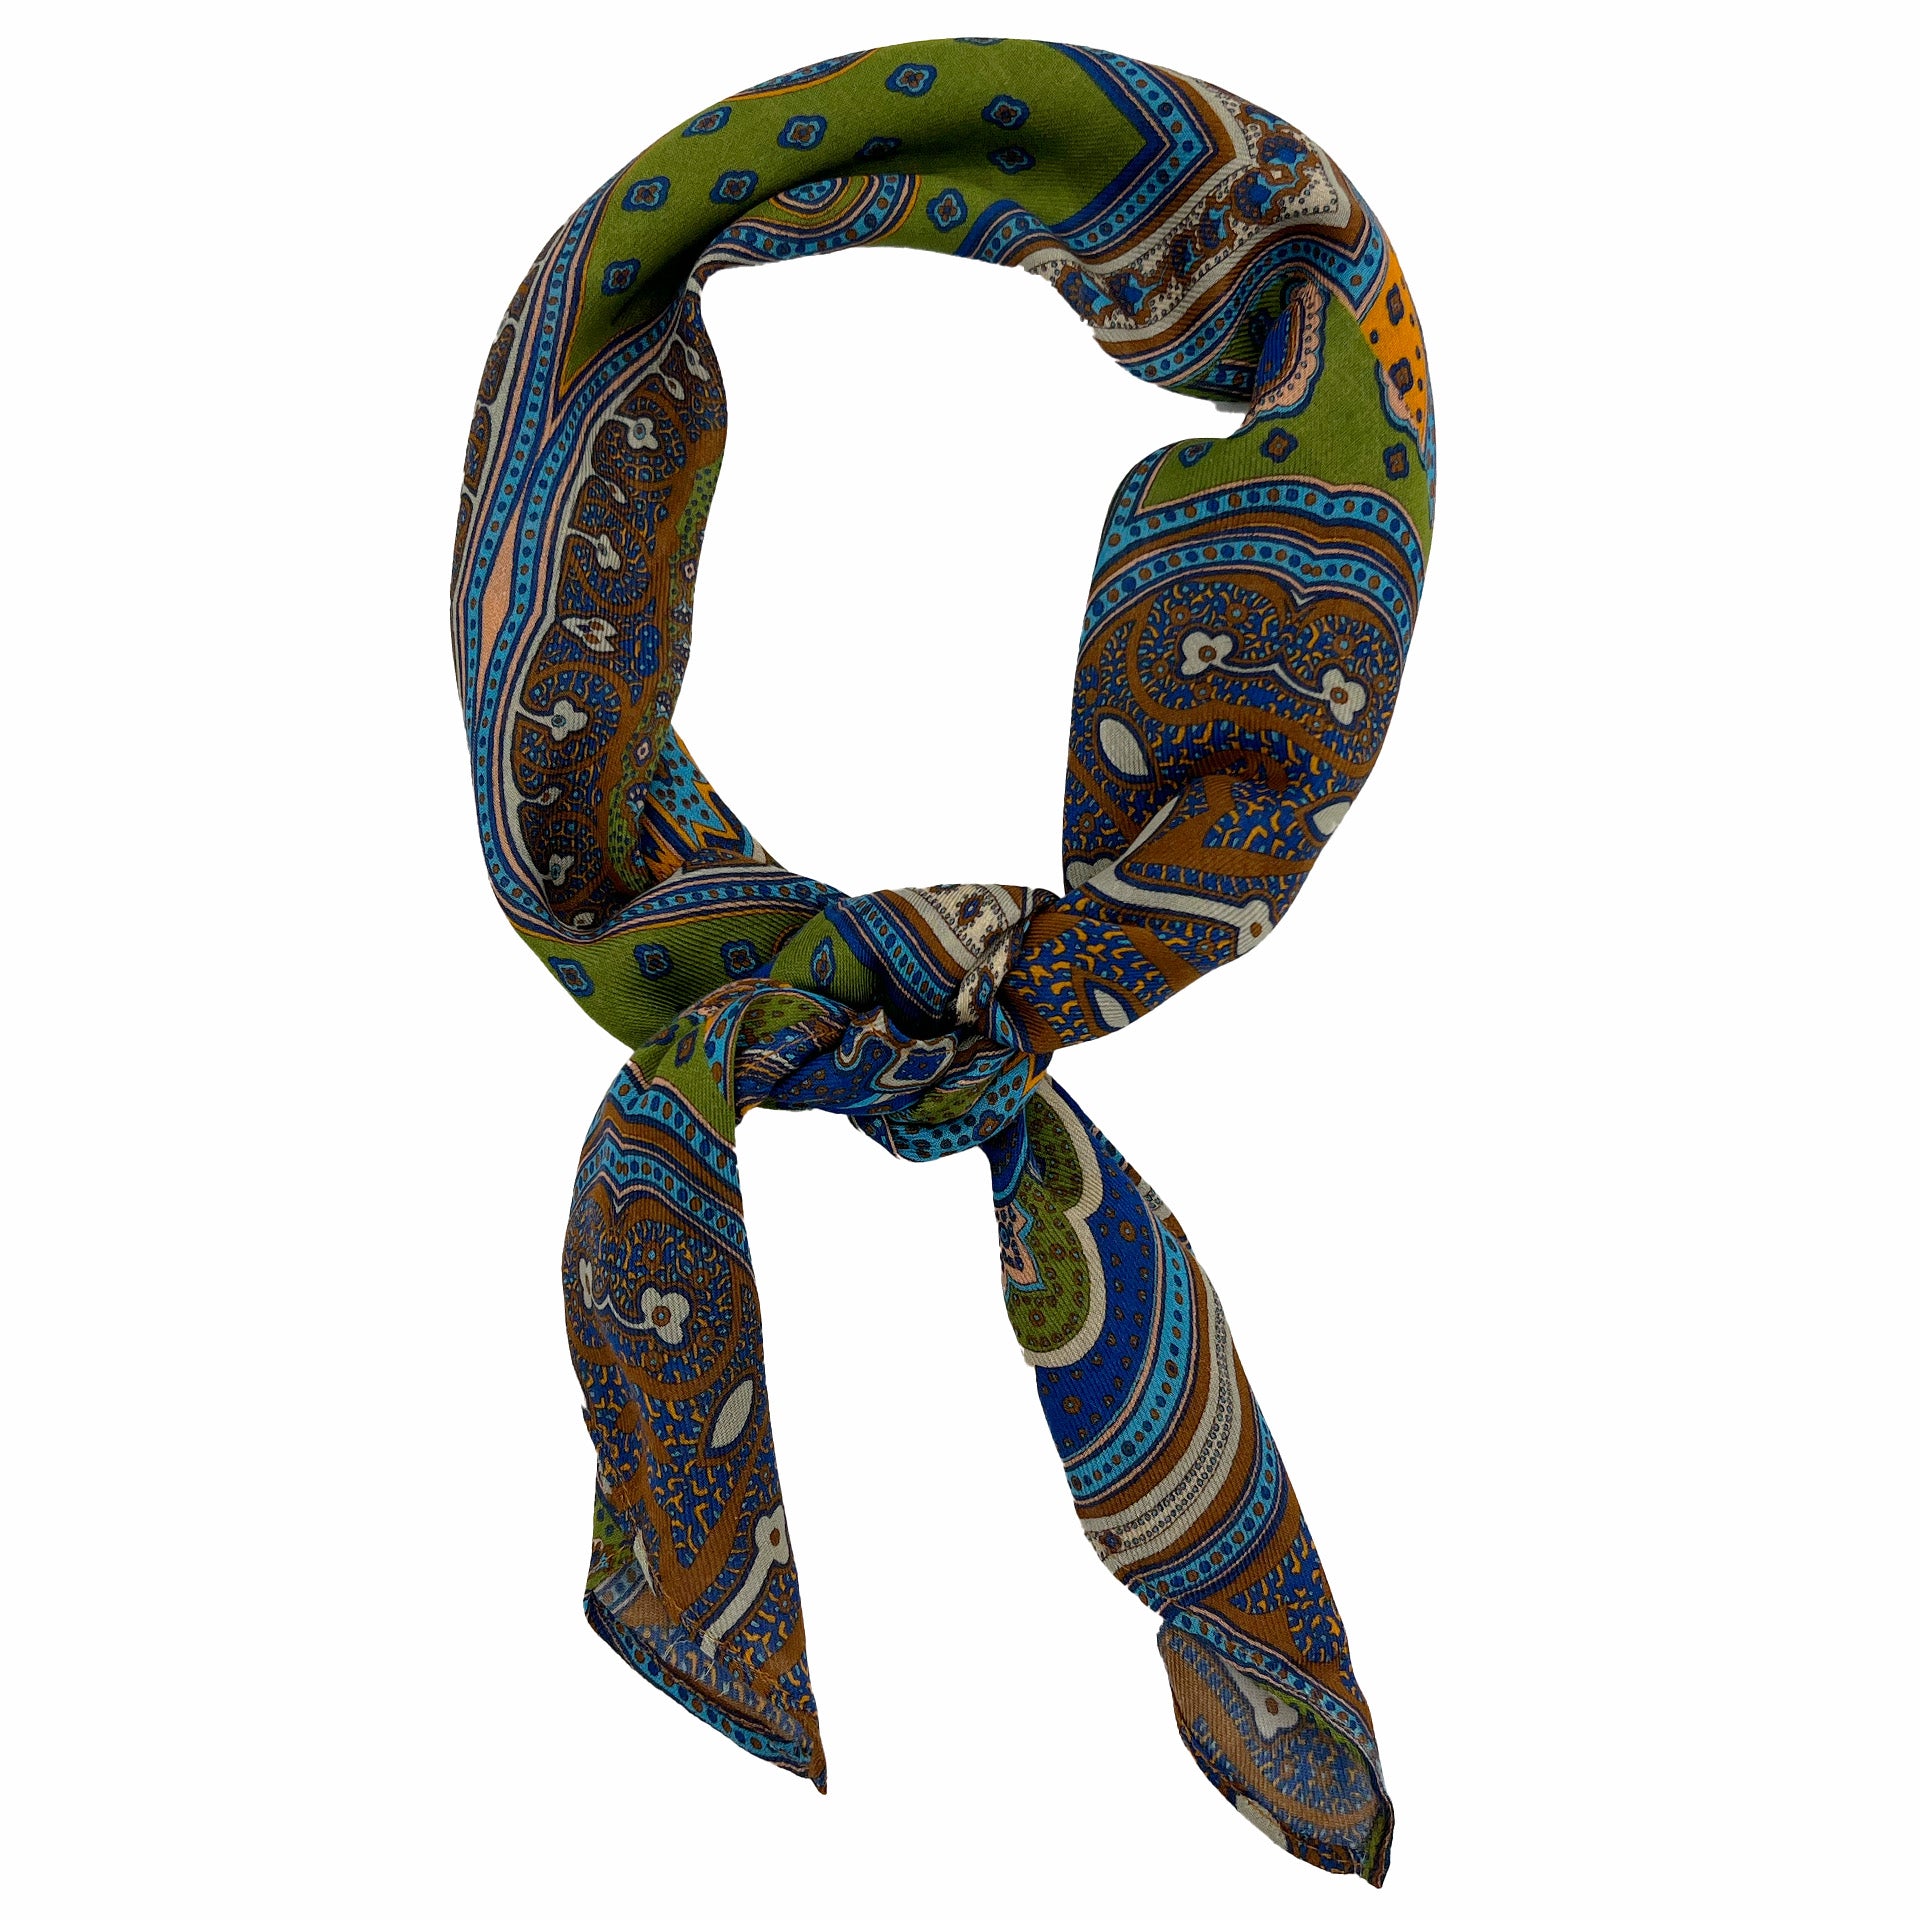 'The Montreal' multicoloured paisley patterned bandana in appealing earthy tones. Knotted into a loop on a white background.